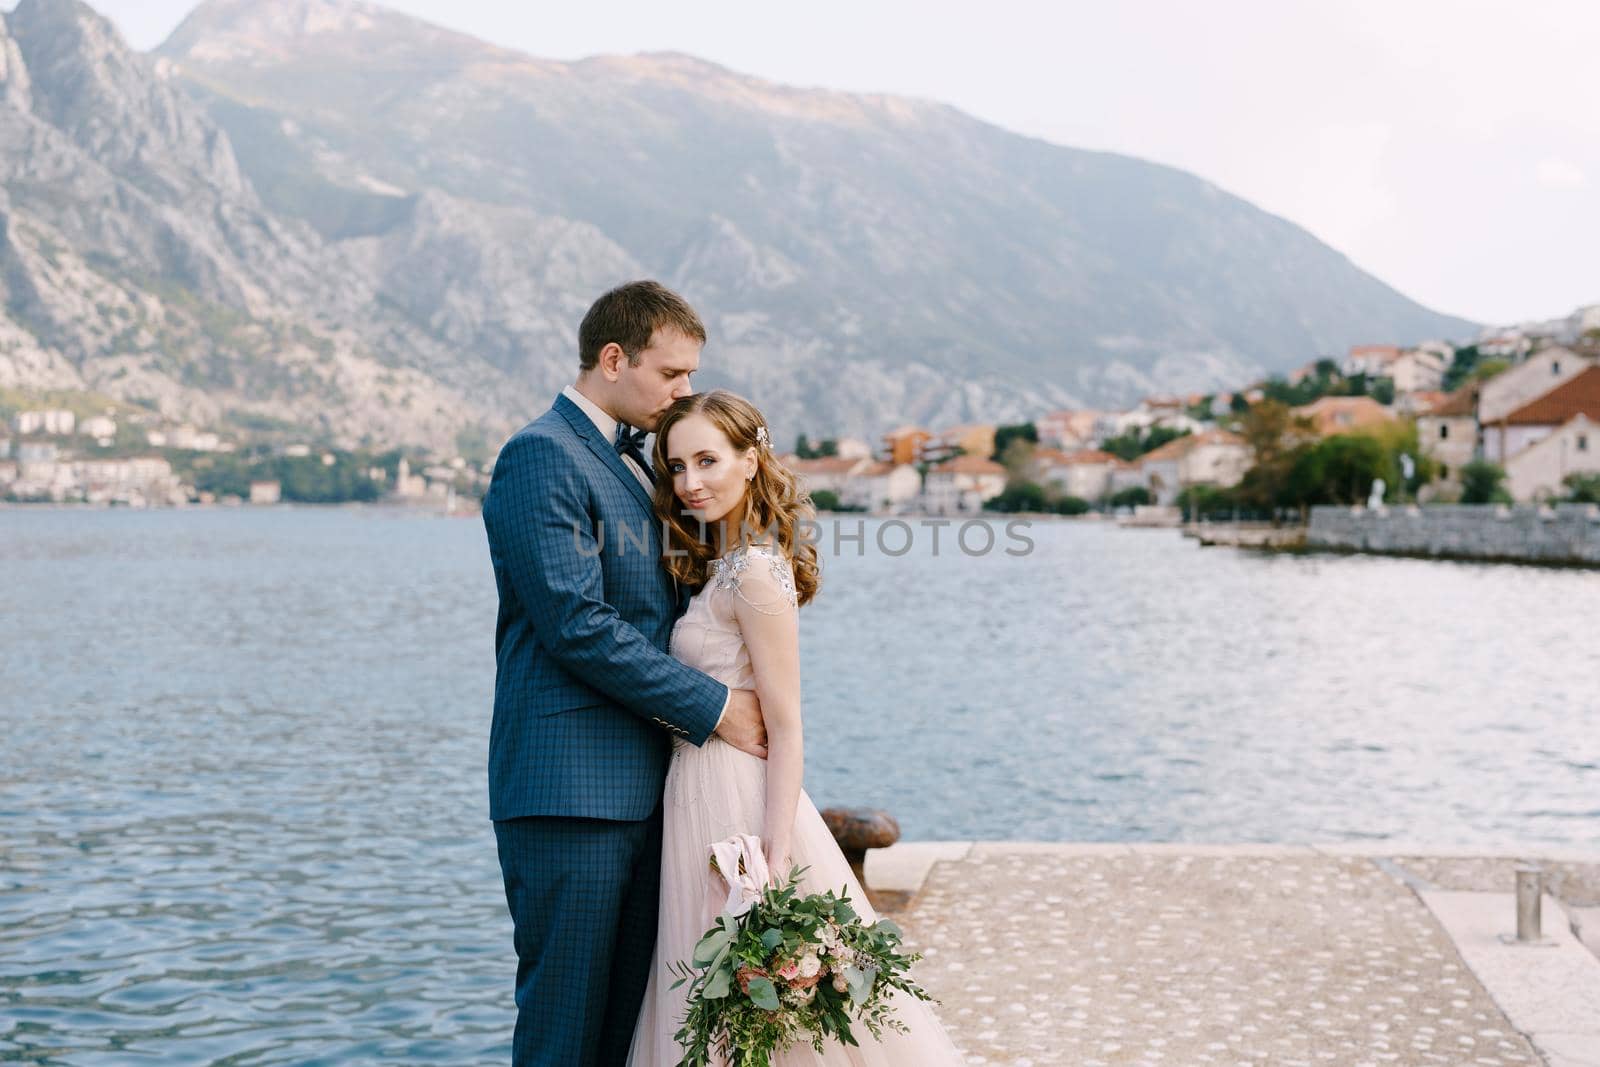 Groom hugs bride on the pier against the backdrop of mountains and the town on the coast. High quality photo